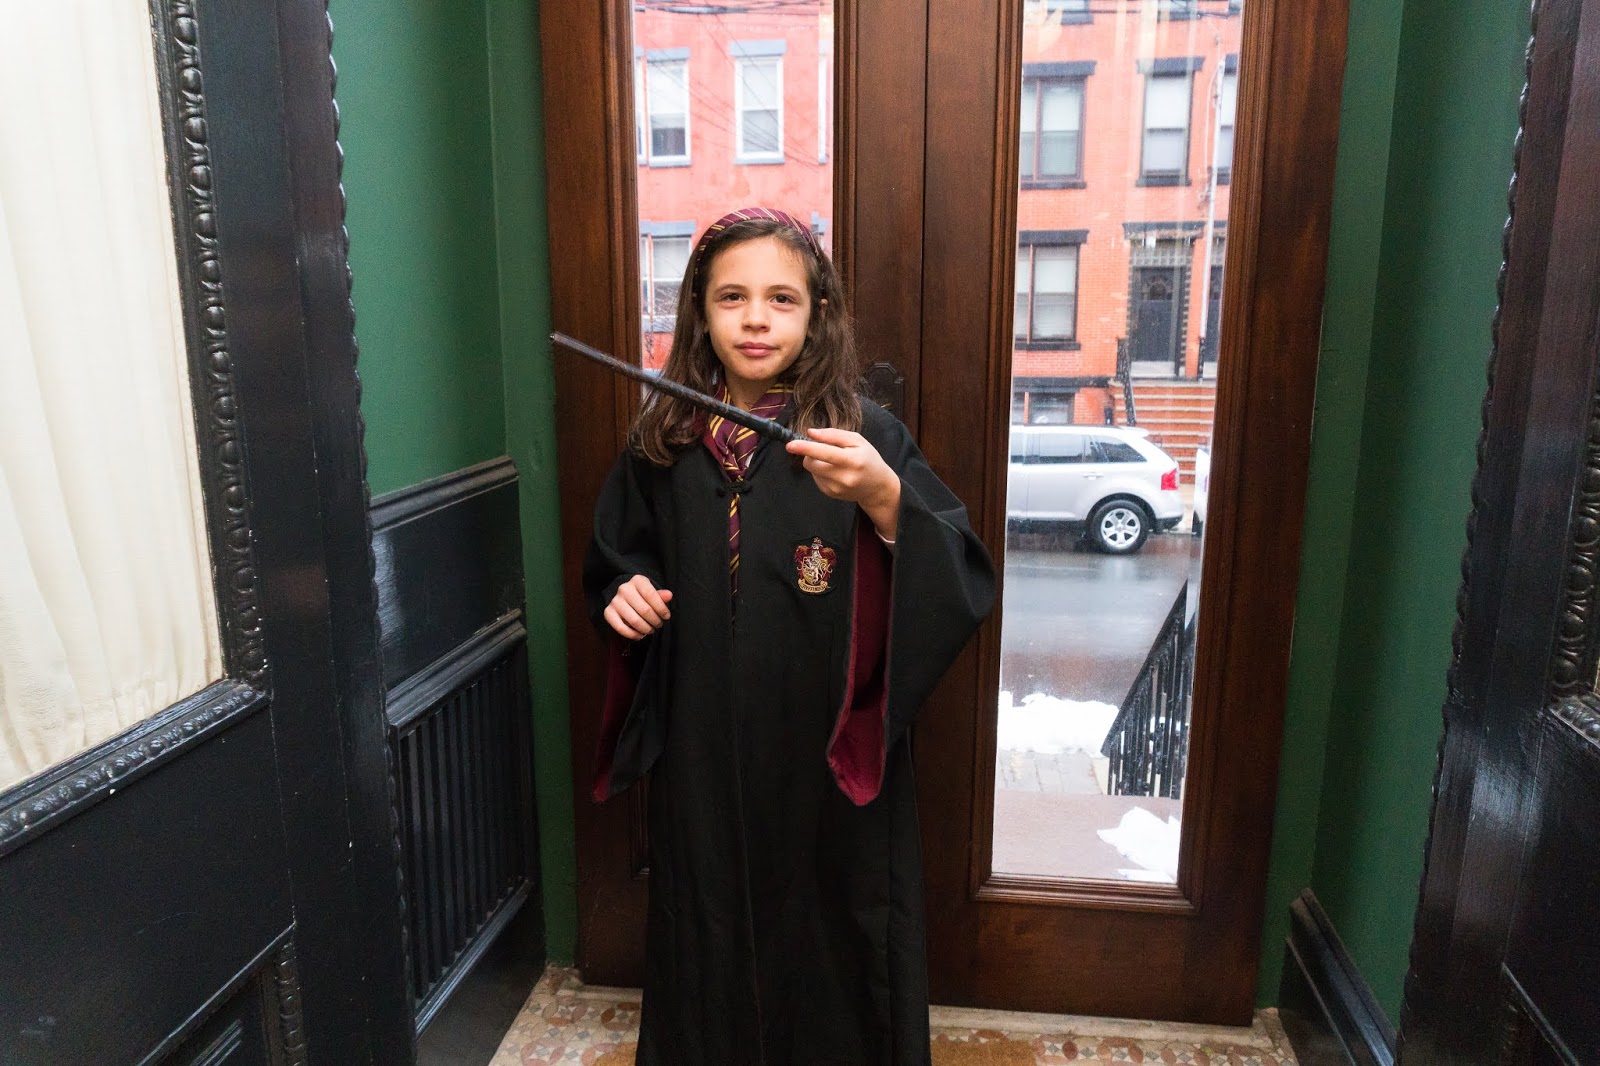 the sparkly life: I'm Pretty Darn Proud of This Harry Potter Birthday Party